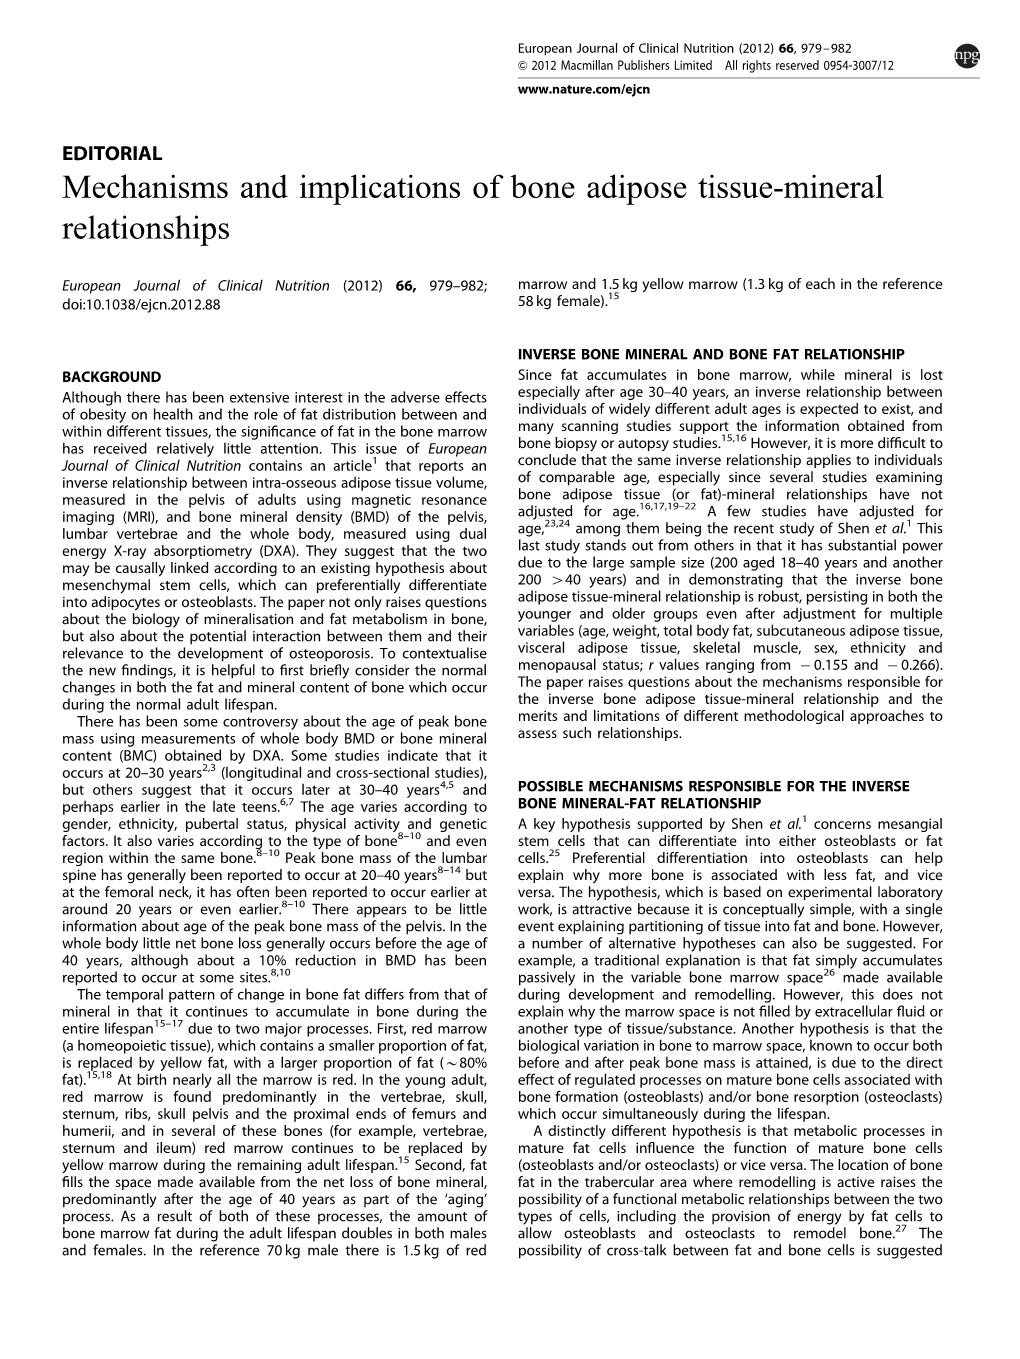 Mechanisms and Implications of Bone Adipose Tissue-Mineral Relationships